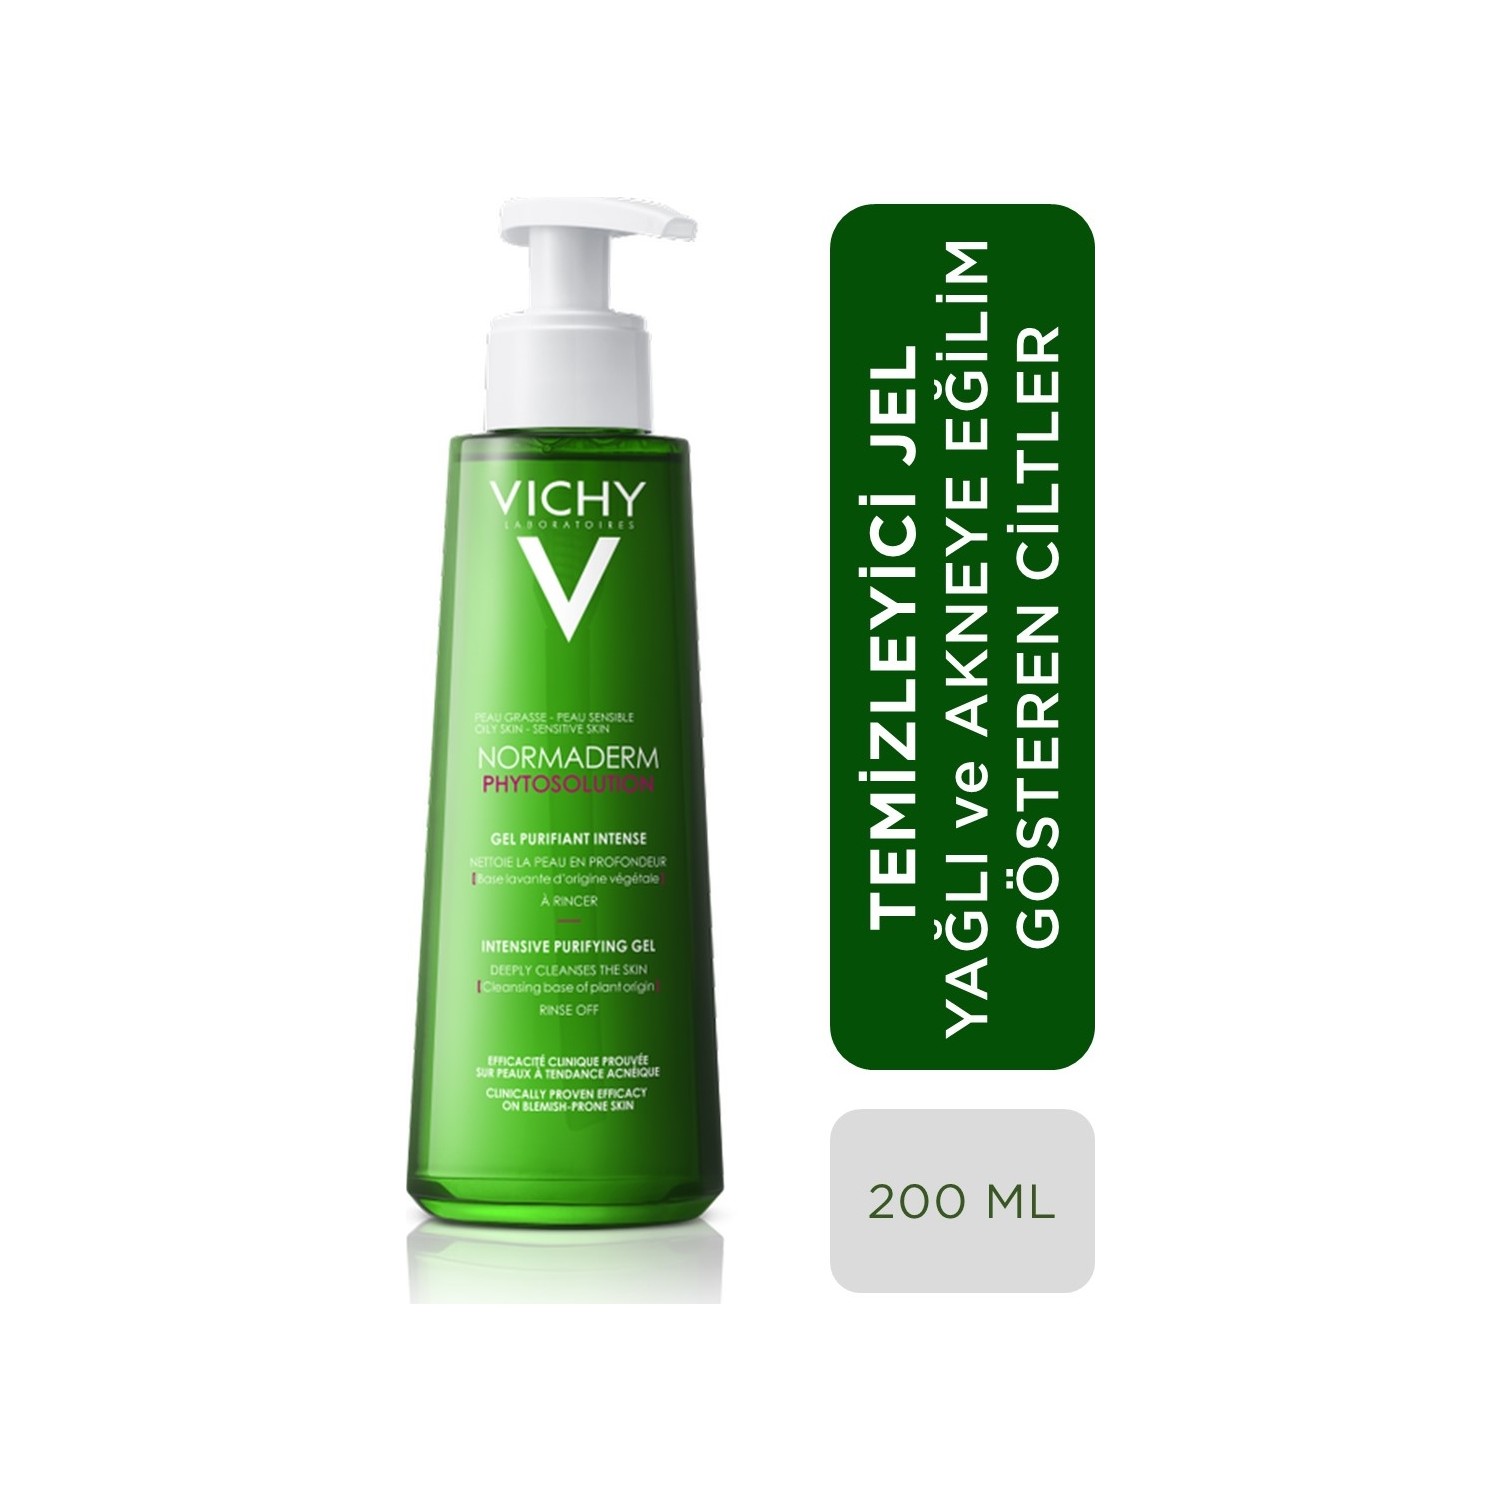 Vichy Normaderm. Виши Нормадерм phytosolution. Vichy гель Normaderm phytosolution Intensive Purifying Gel, 200 мл. Vichy Normaderm phytosolution гель пробник. Vichy normaderm intensive purifying gel